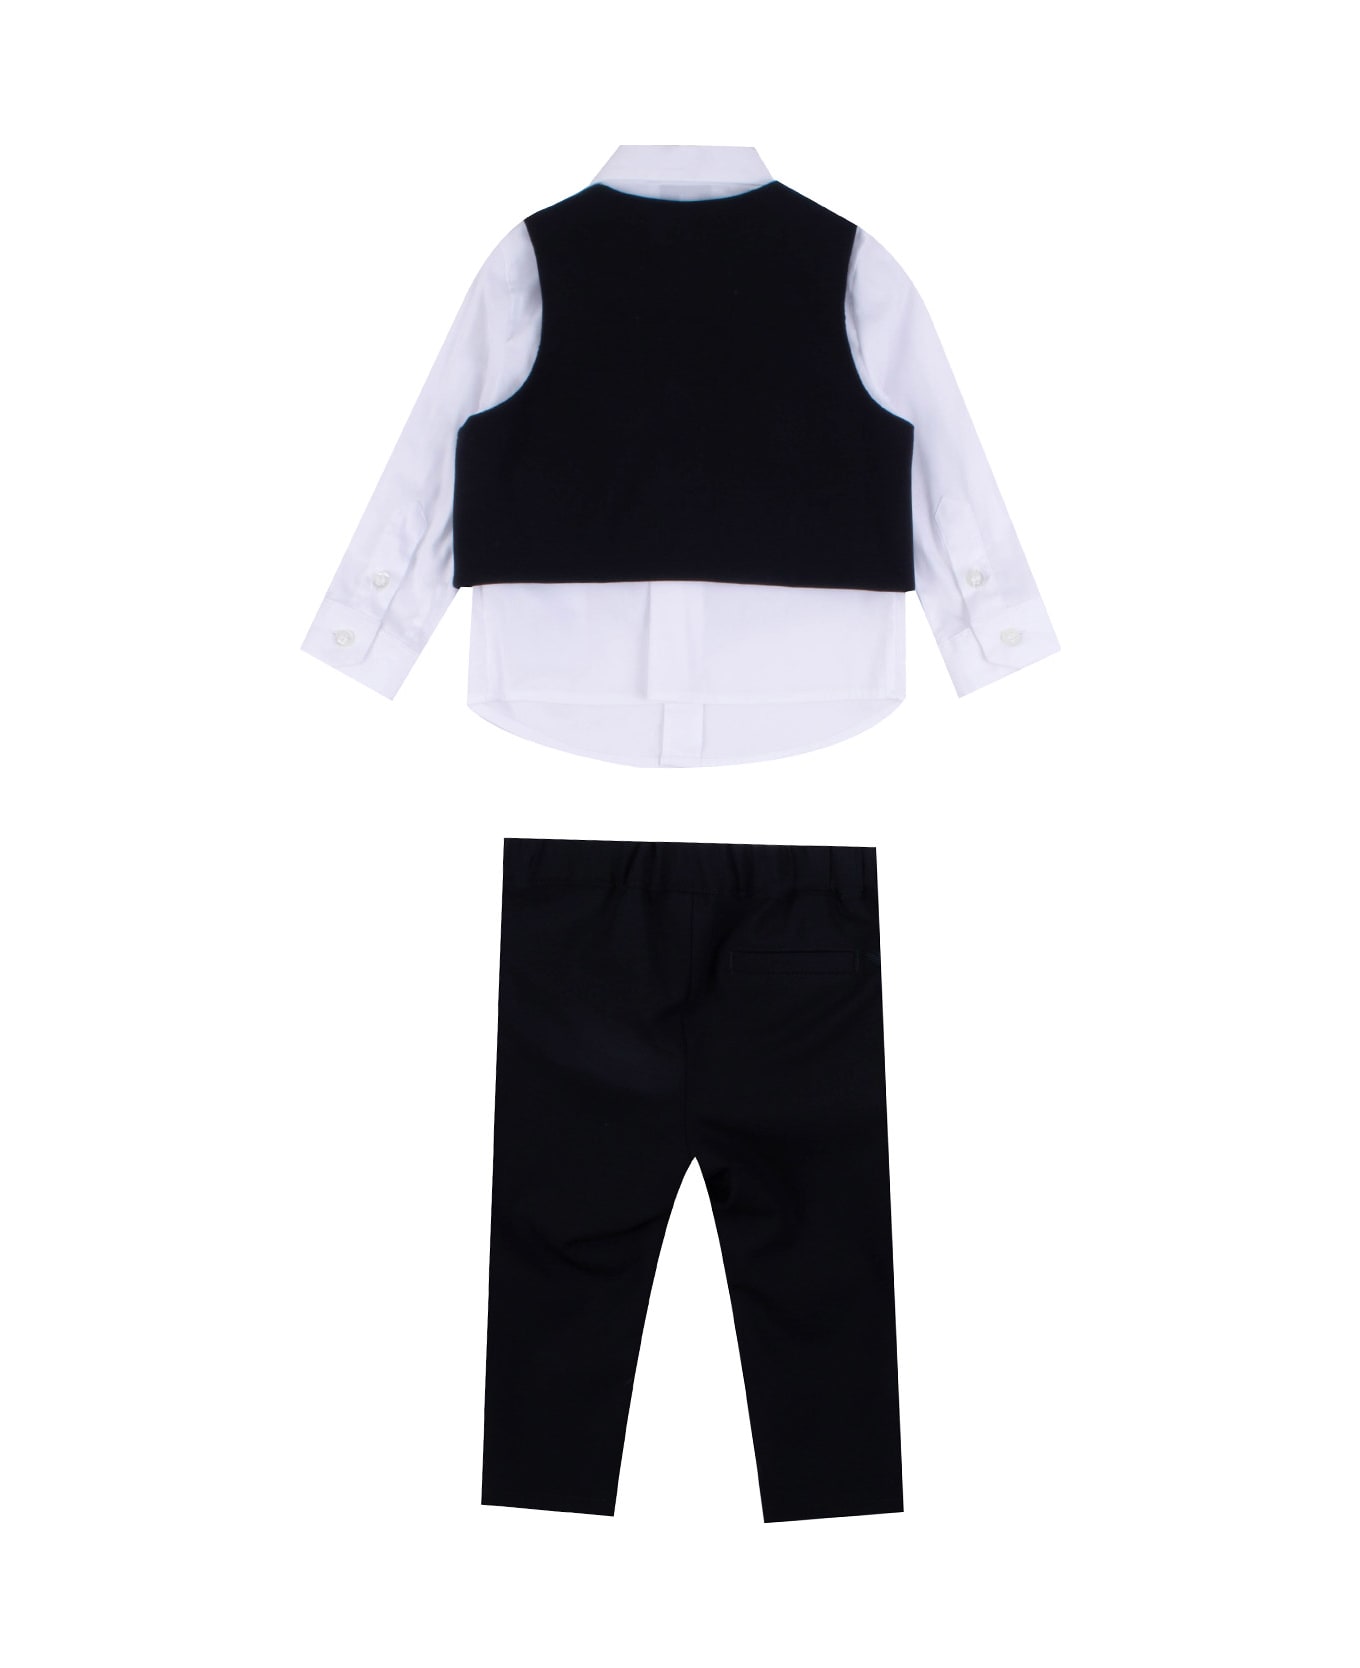 Emporio Armani Cotton Vest, Shirt And Pants - Back ボディスーツ＆セットアップ